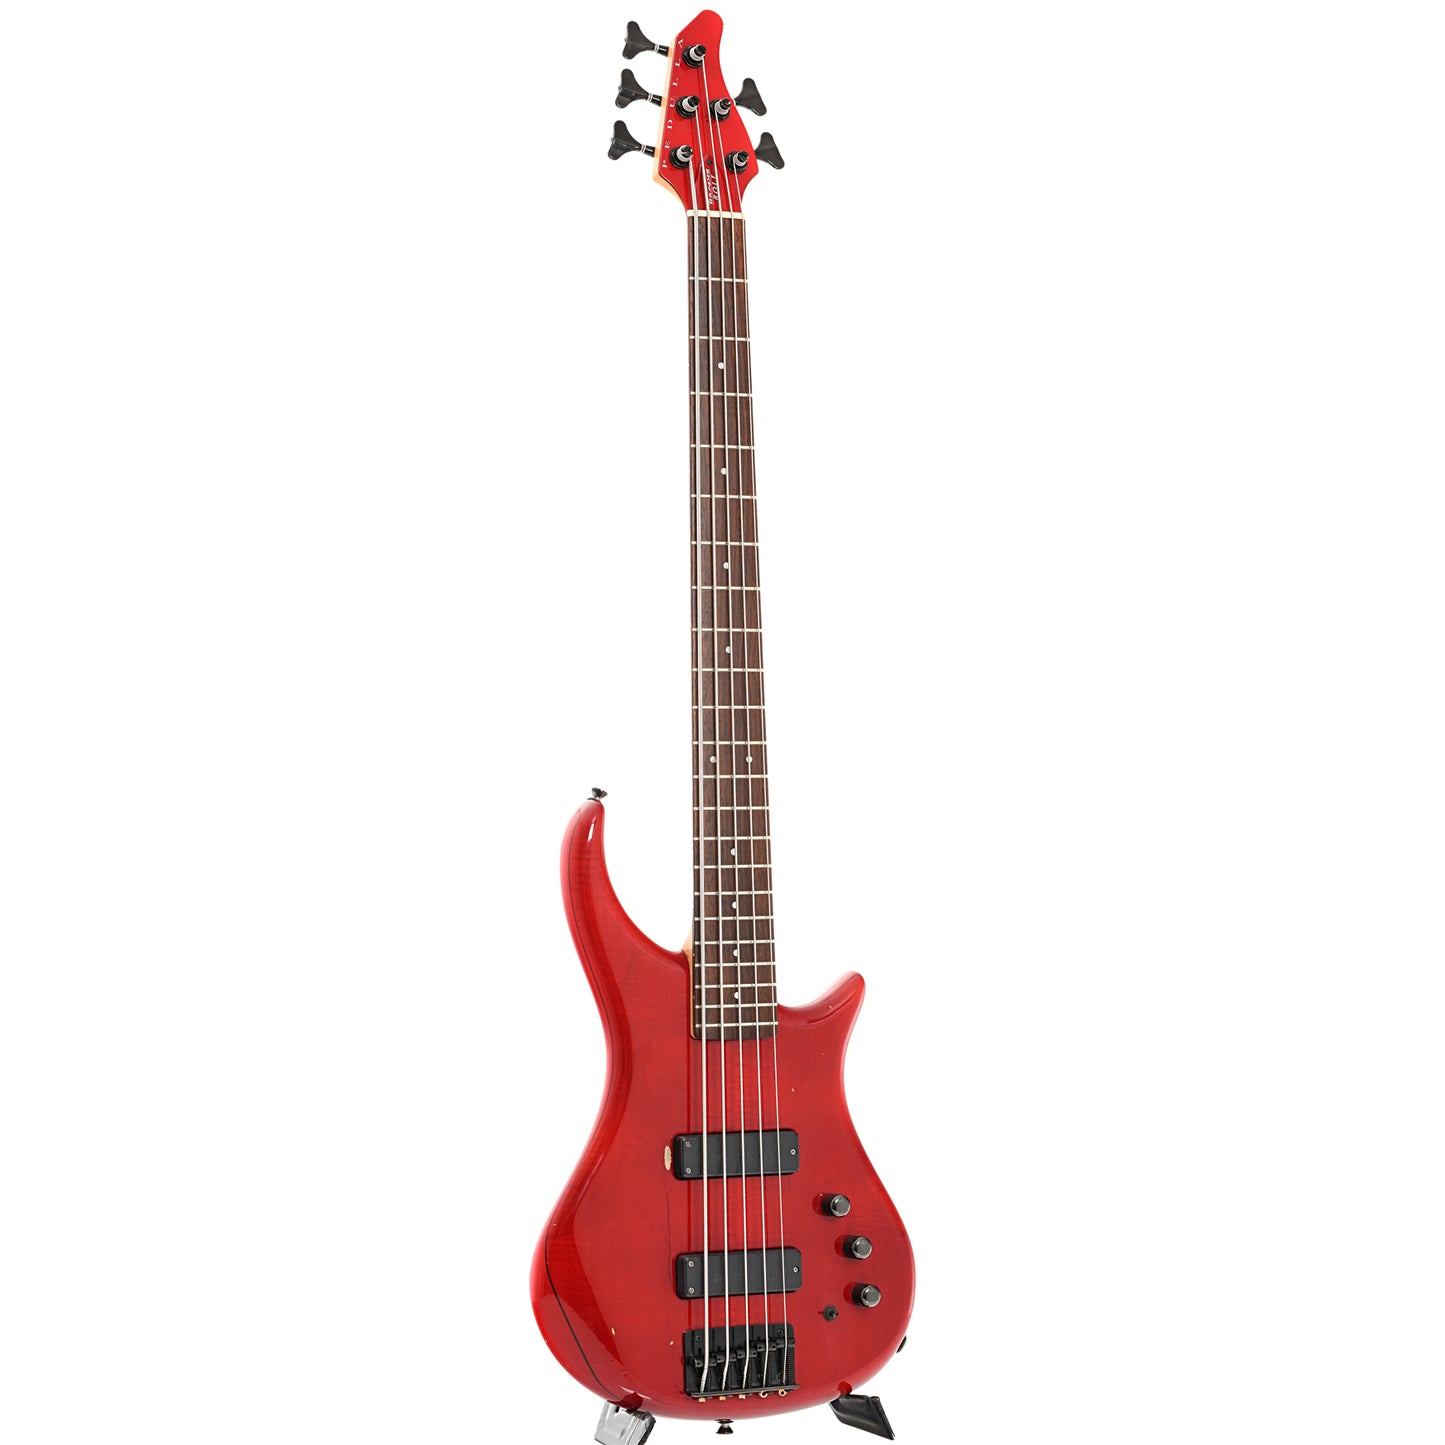 Full front and side of Pedulla Thunder Bolt 5-String Electric Bass